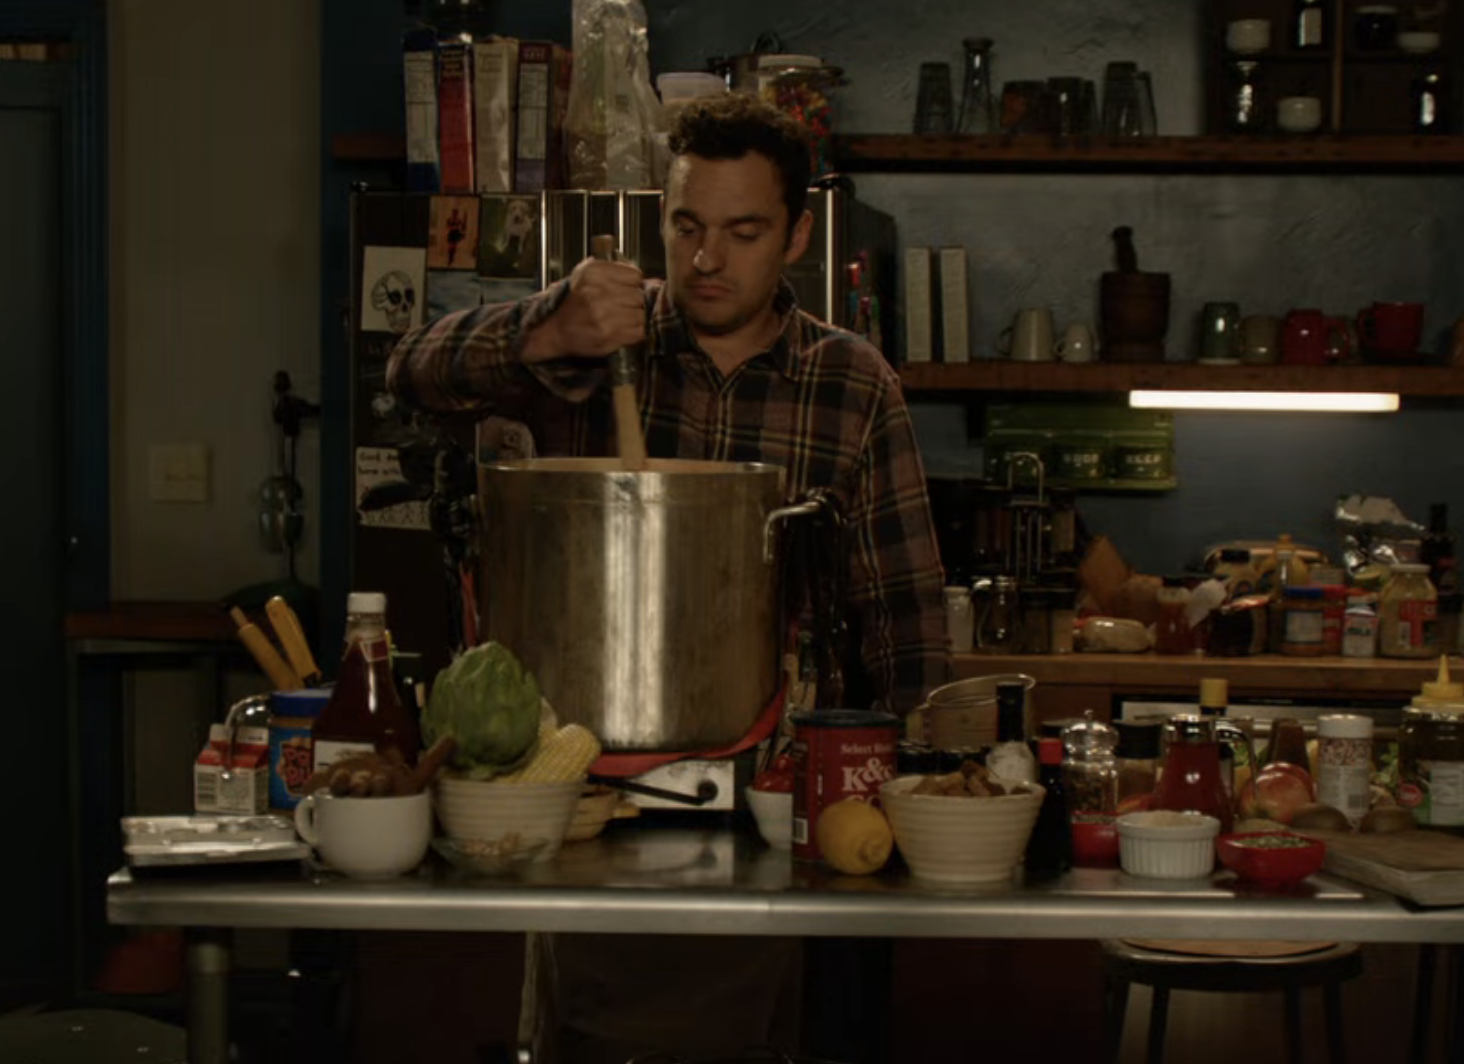 Nick stirring a pot in the kitchen with tons of ingredients on the counter around him